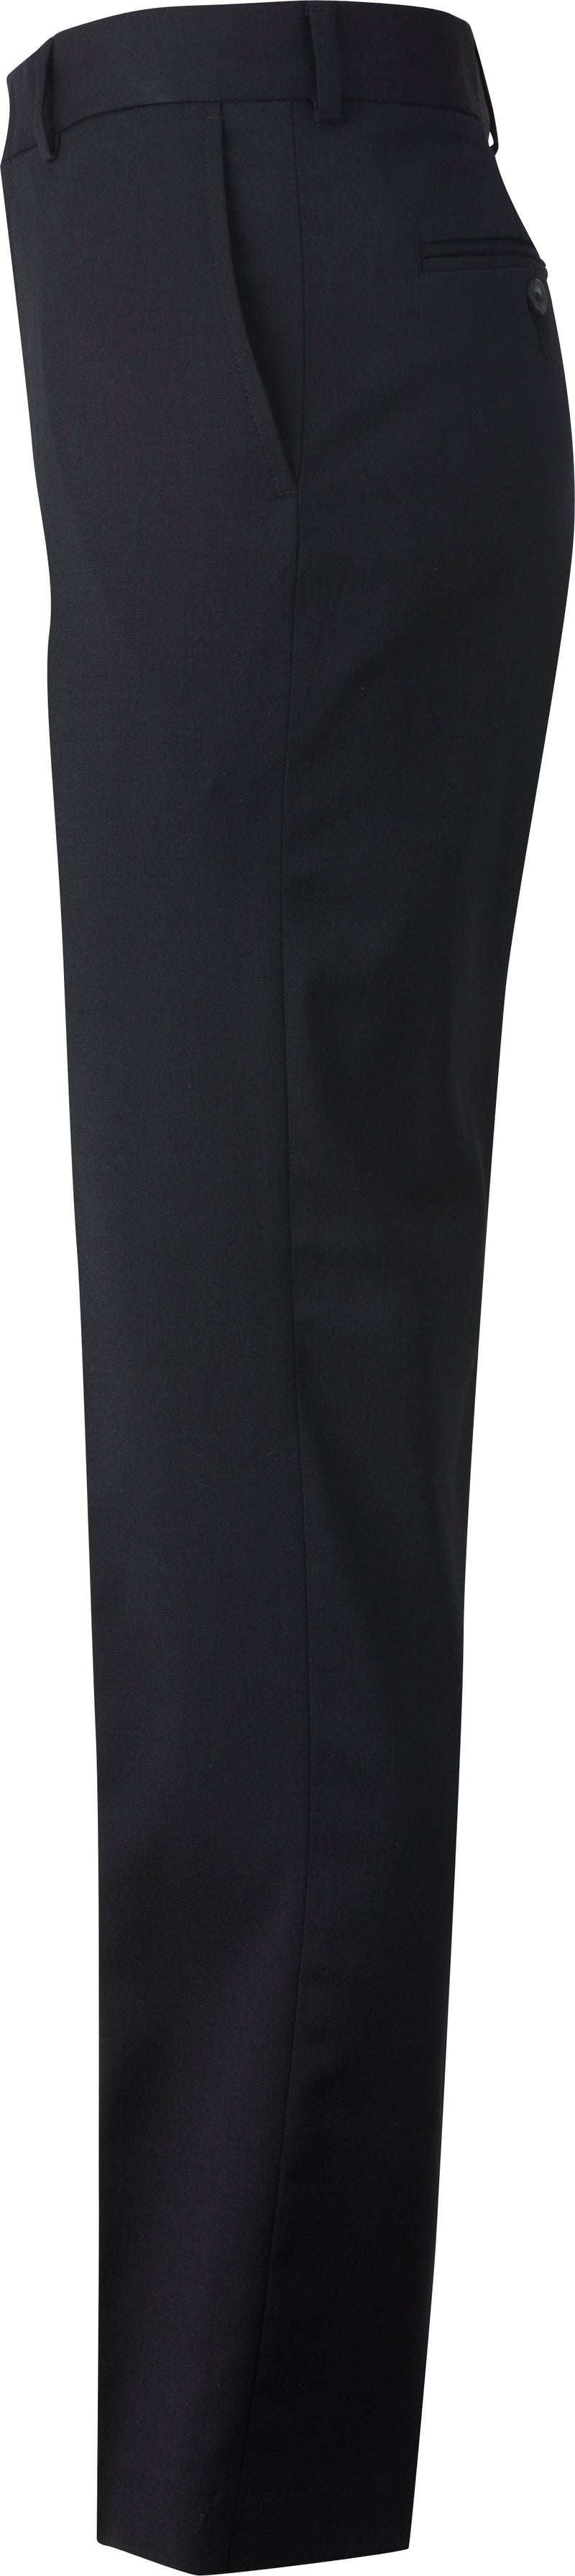 Edwards [2530] Men's Washable Flat-Front Dress Pant. Redwood & Ross Russel Collection. Live Chat For Bulk Discounts.